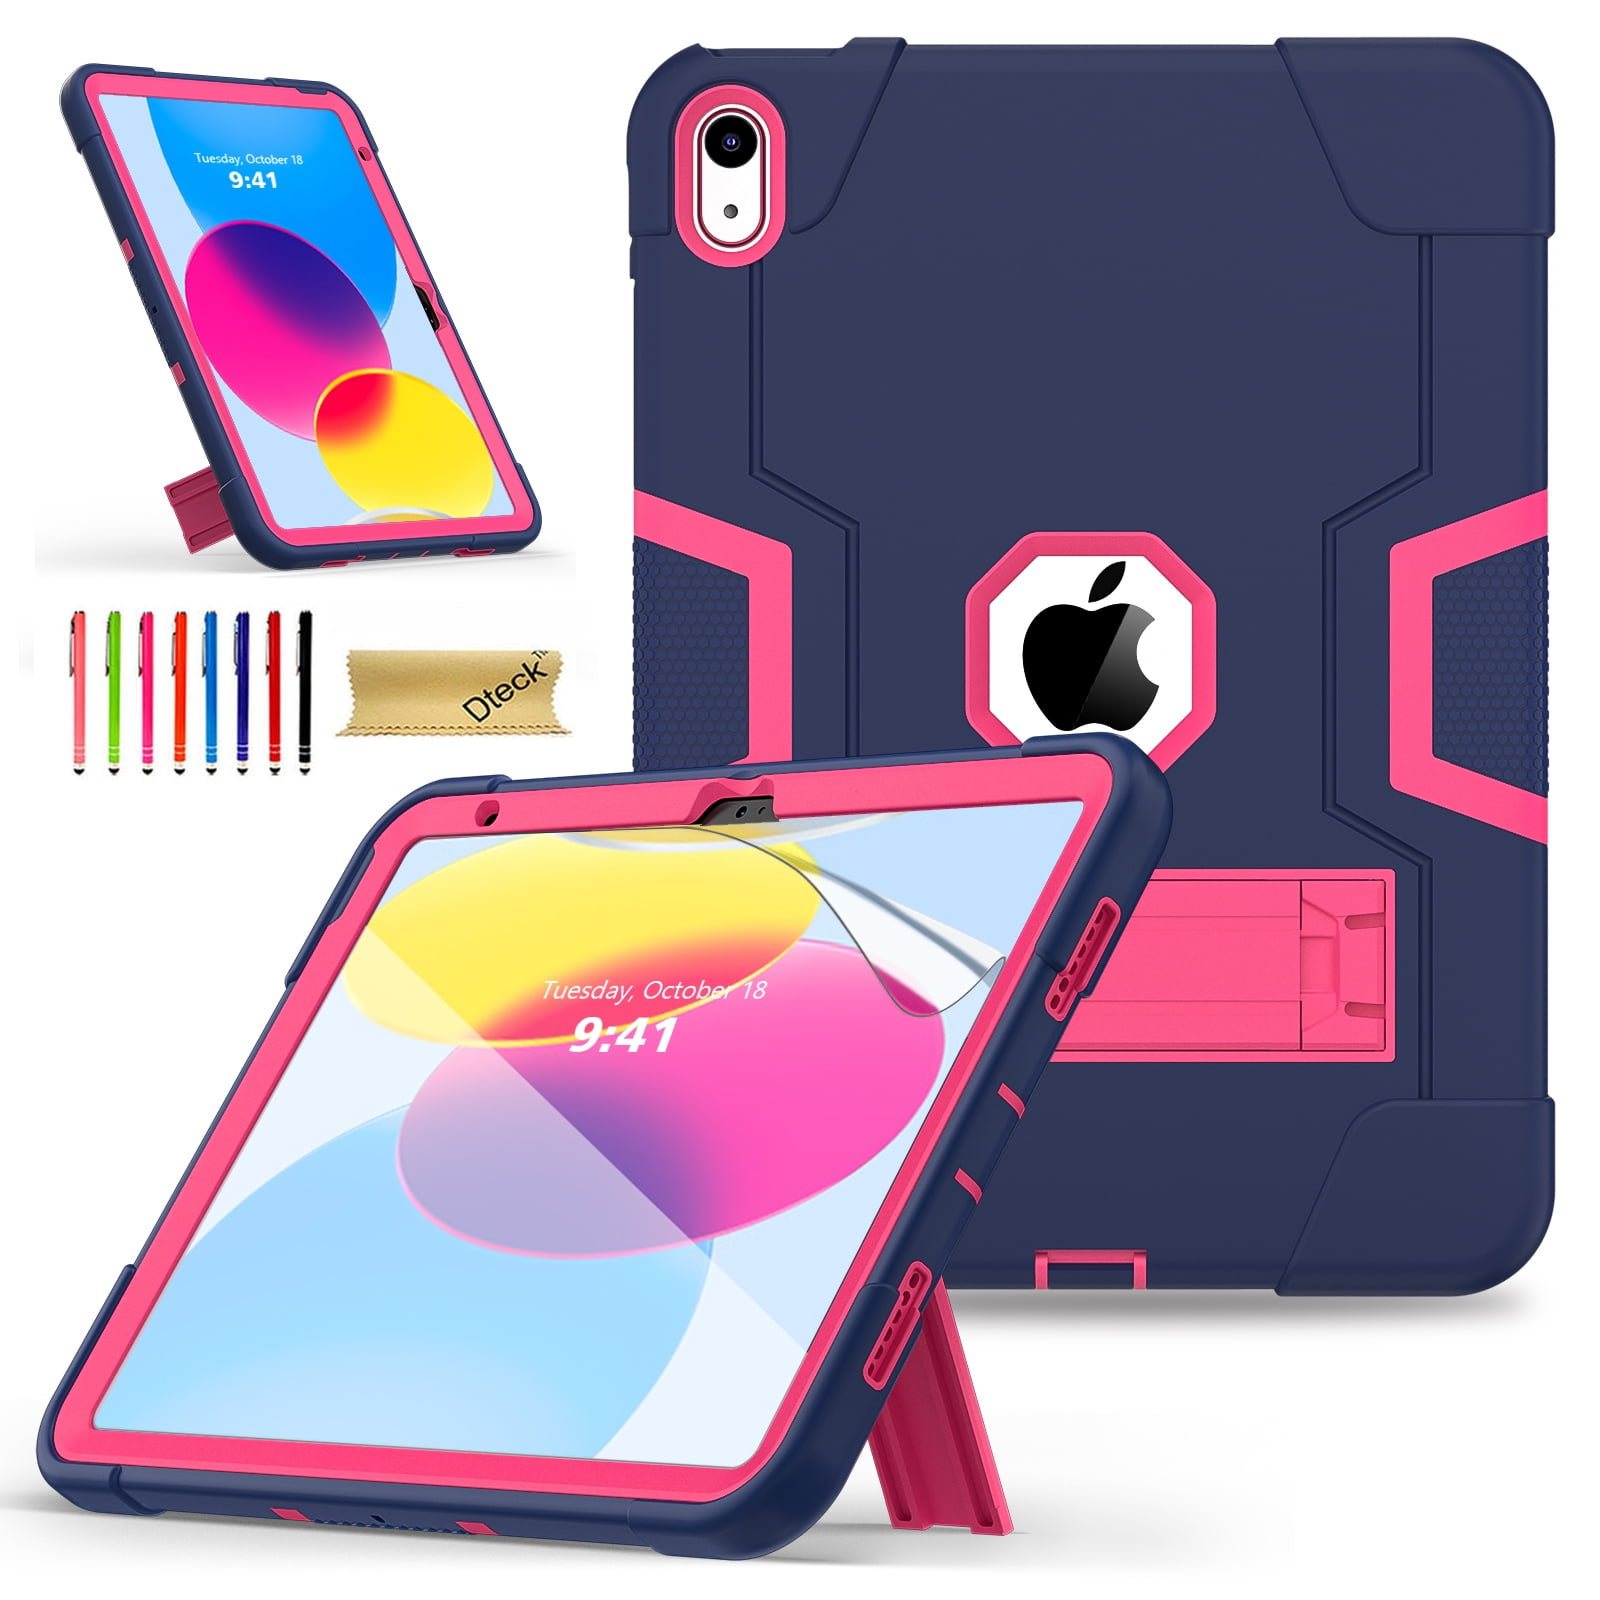 Dteck for iPad 10th Generation Case with HD Screen Protector Film, New iPad  (2022) 10.9 inch Rugged Case, Heavy Duty Hybrid Shockproof Case with  Kickstand for iPad 10th Gen 2022,Navy+Rose 